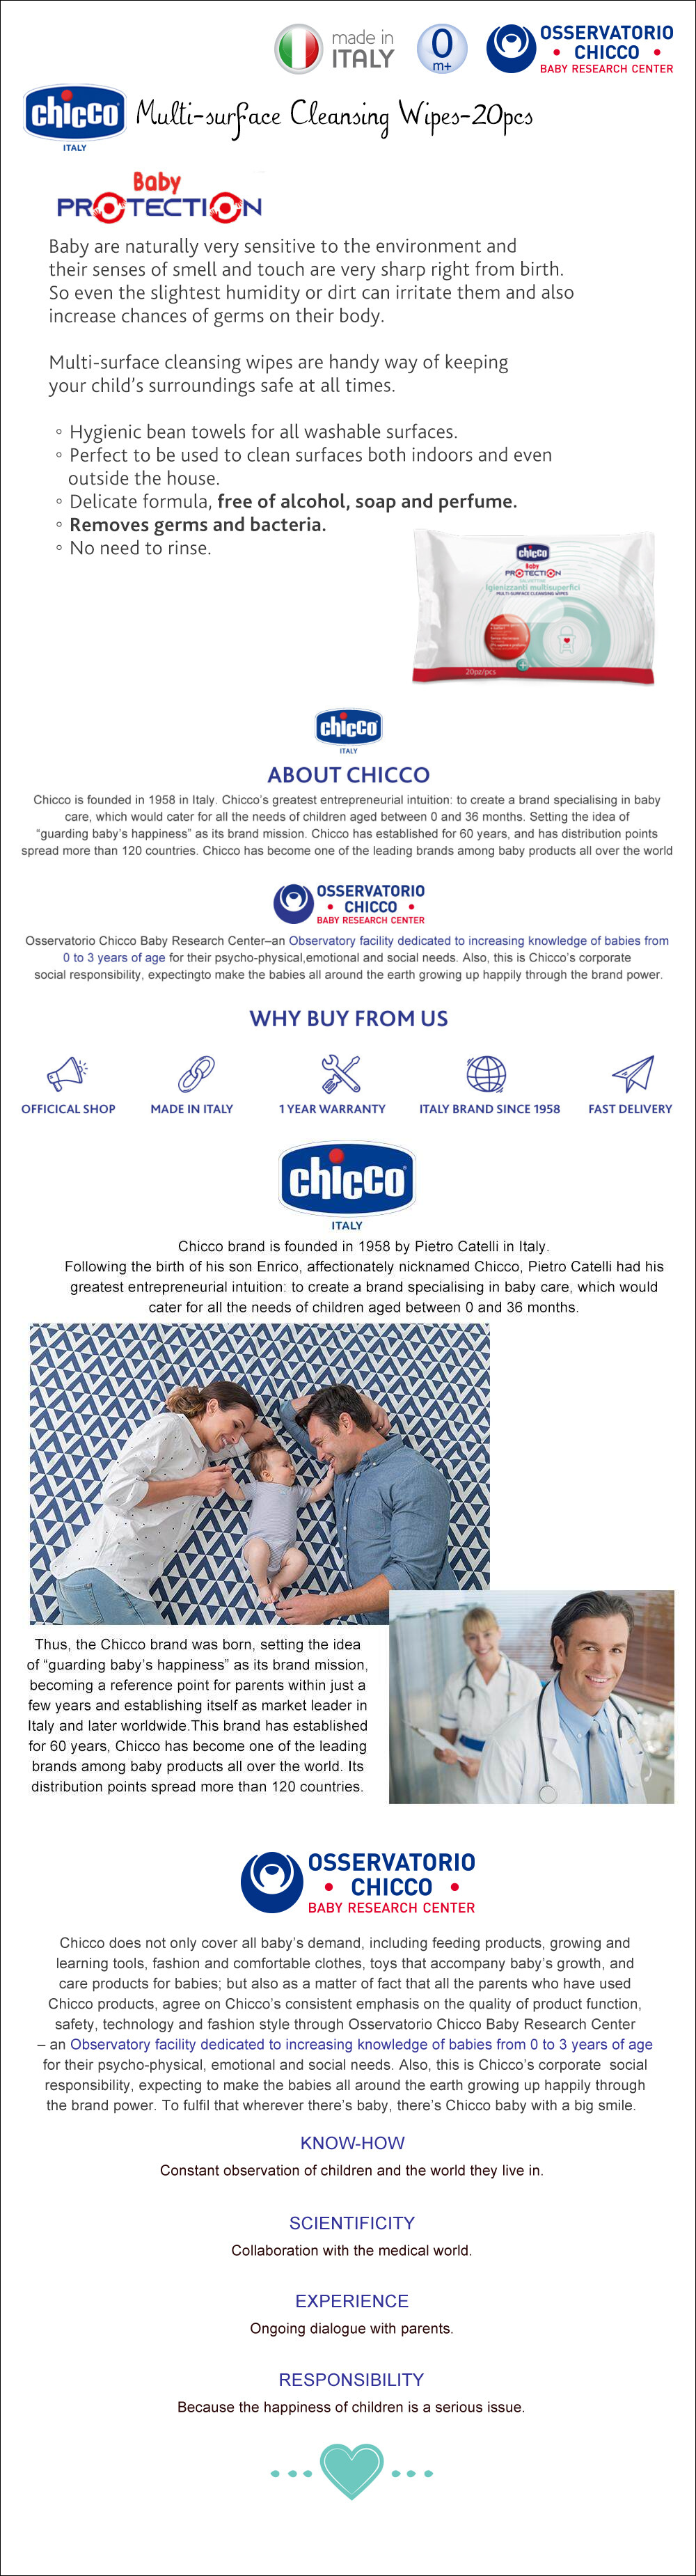 Chicco Multi-surface Cleansing Wipes-20pcs